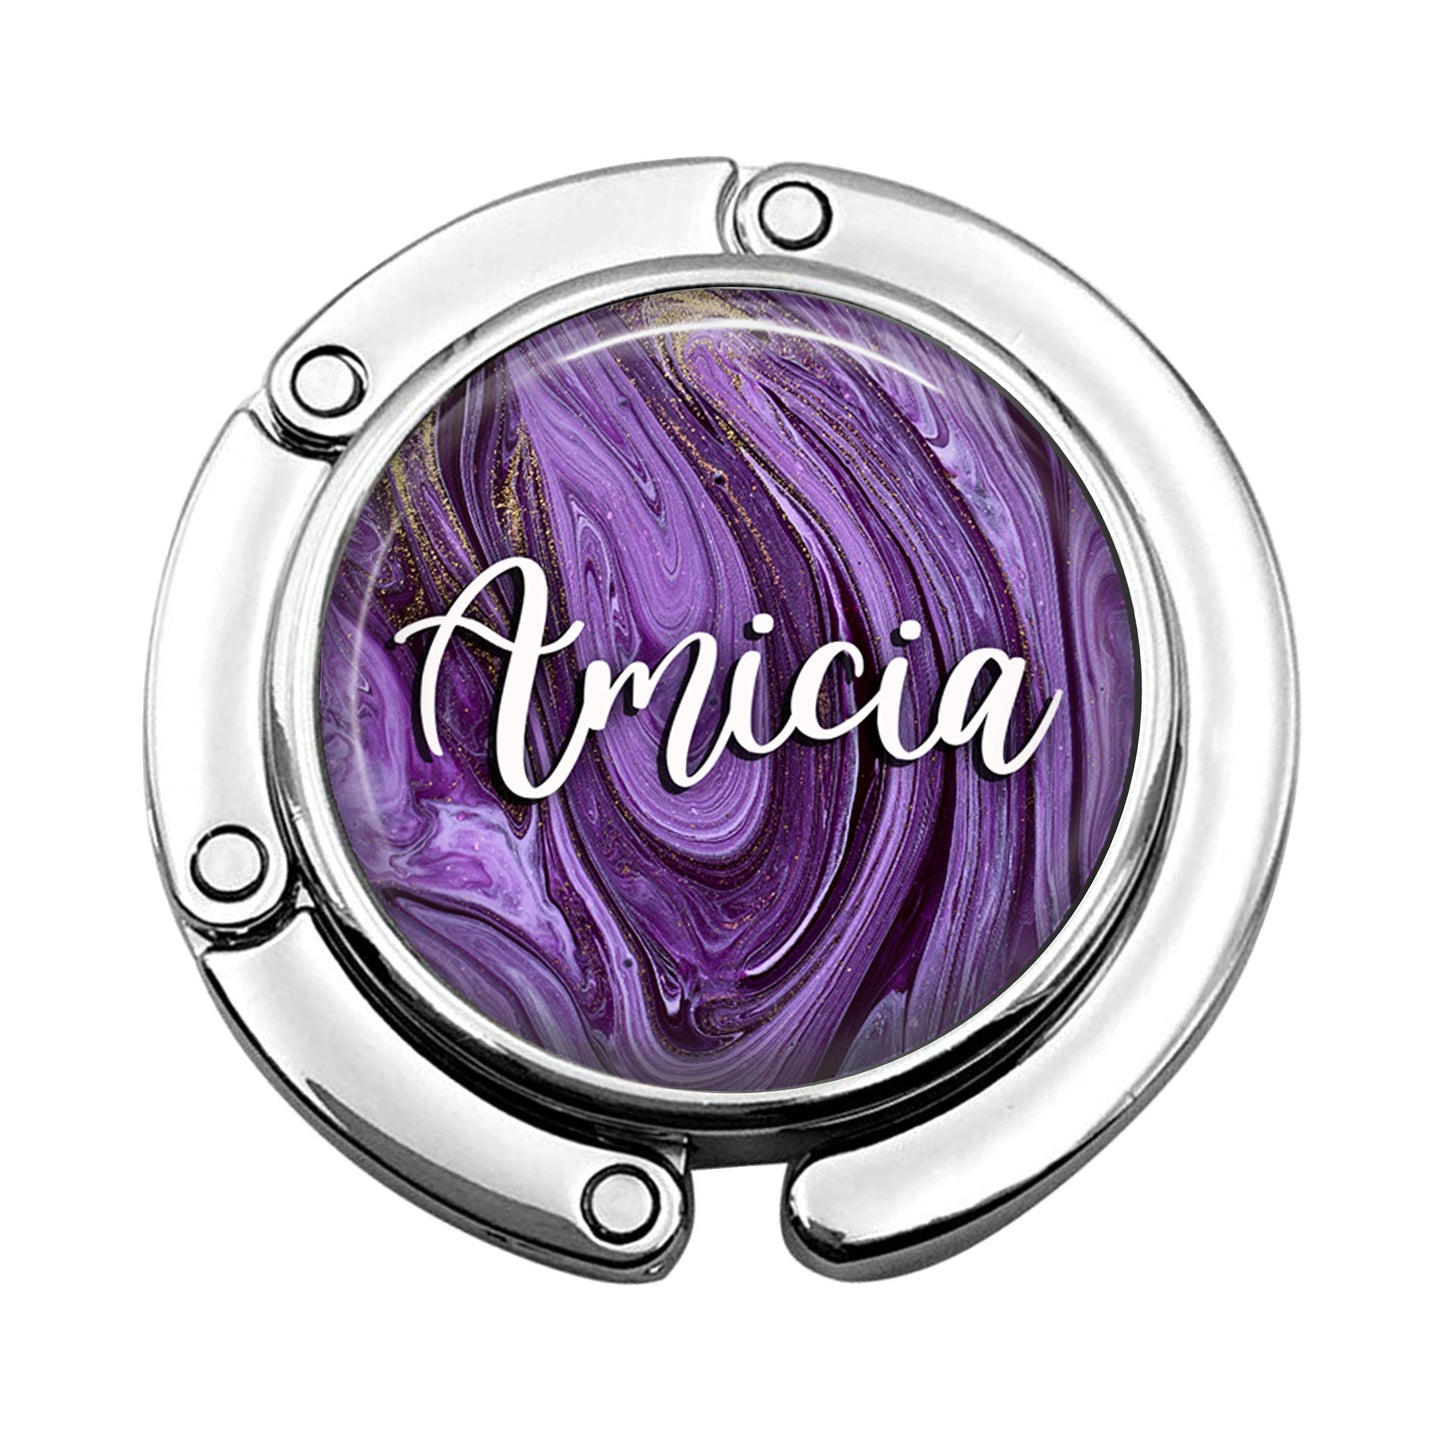 a purple and white object with the word africa on it